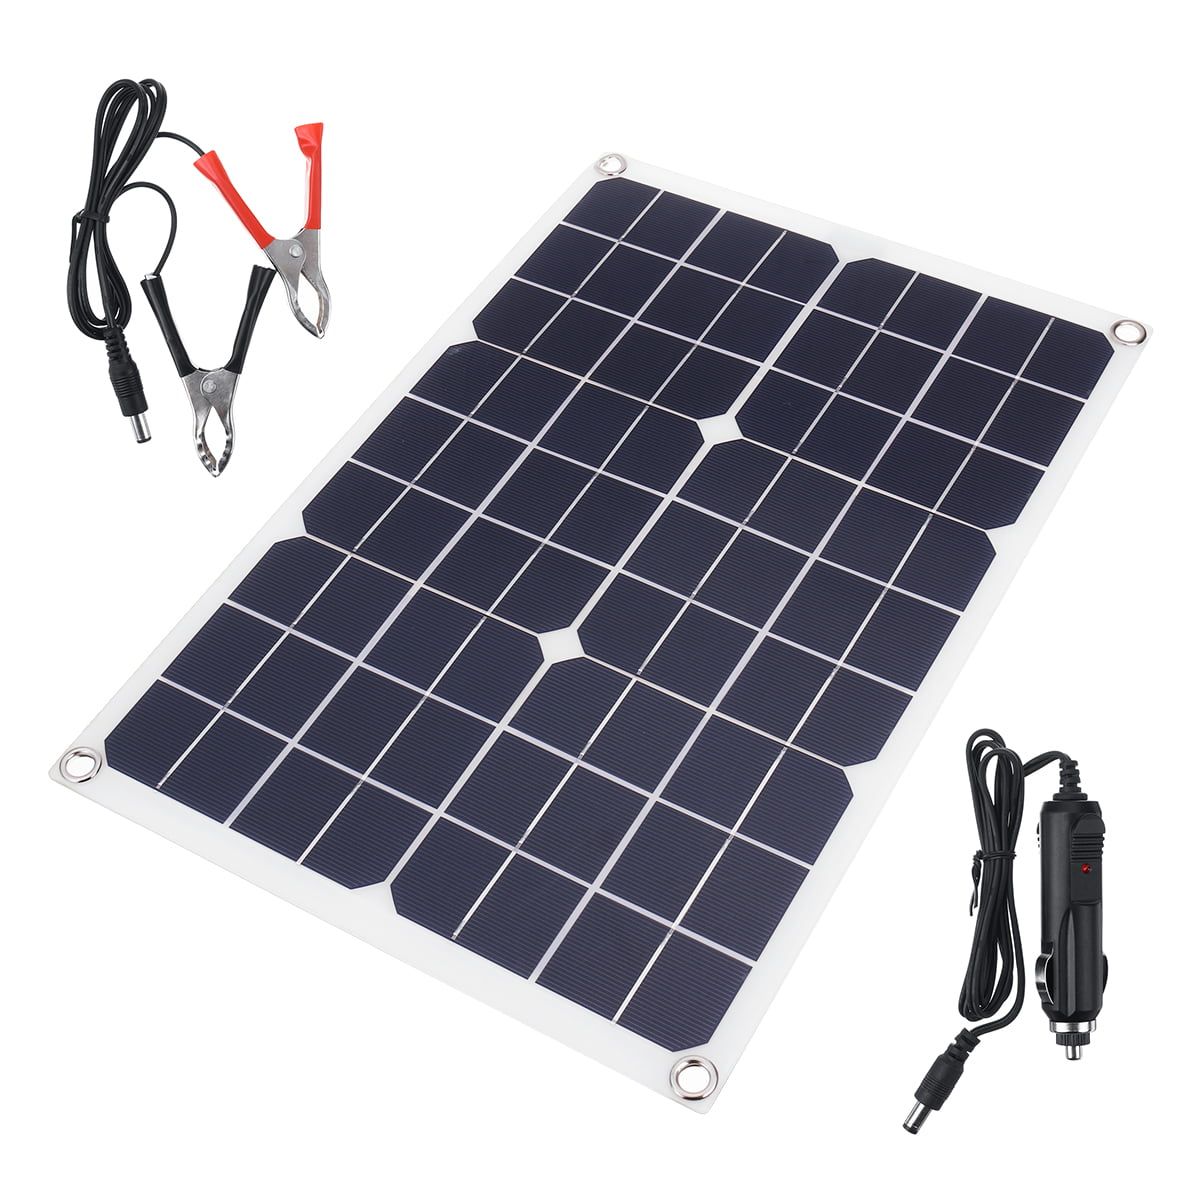 20W 18V Portable Panel Solar Panel Kit for Car Boat Home Camping battery Charger 